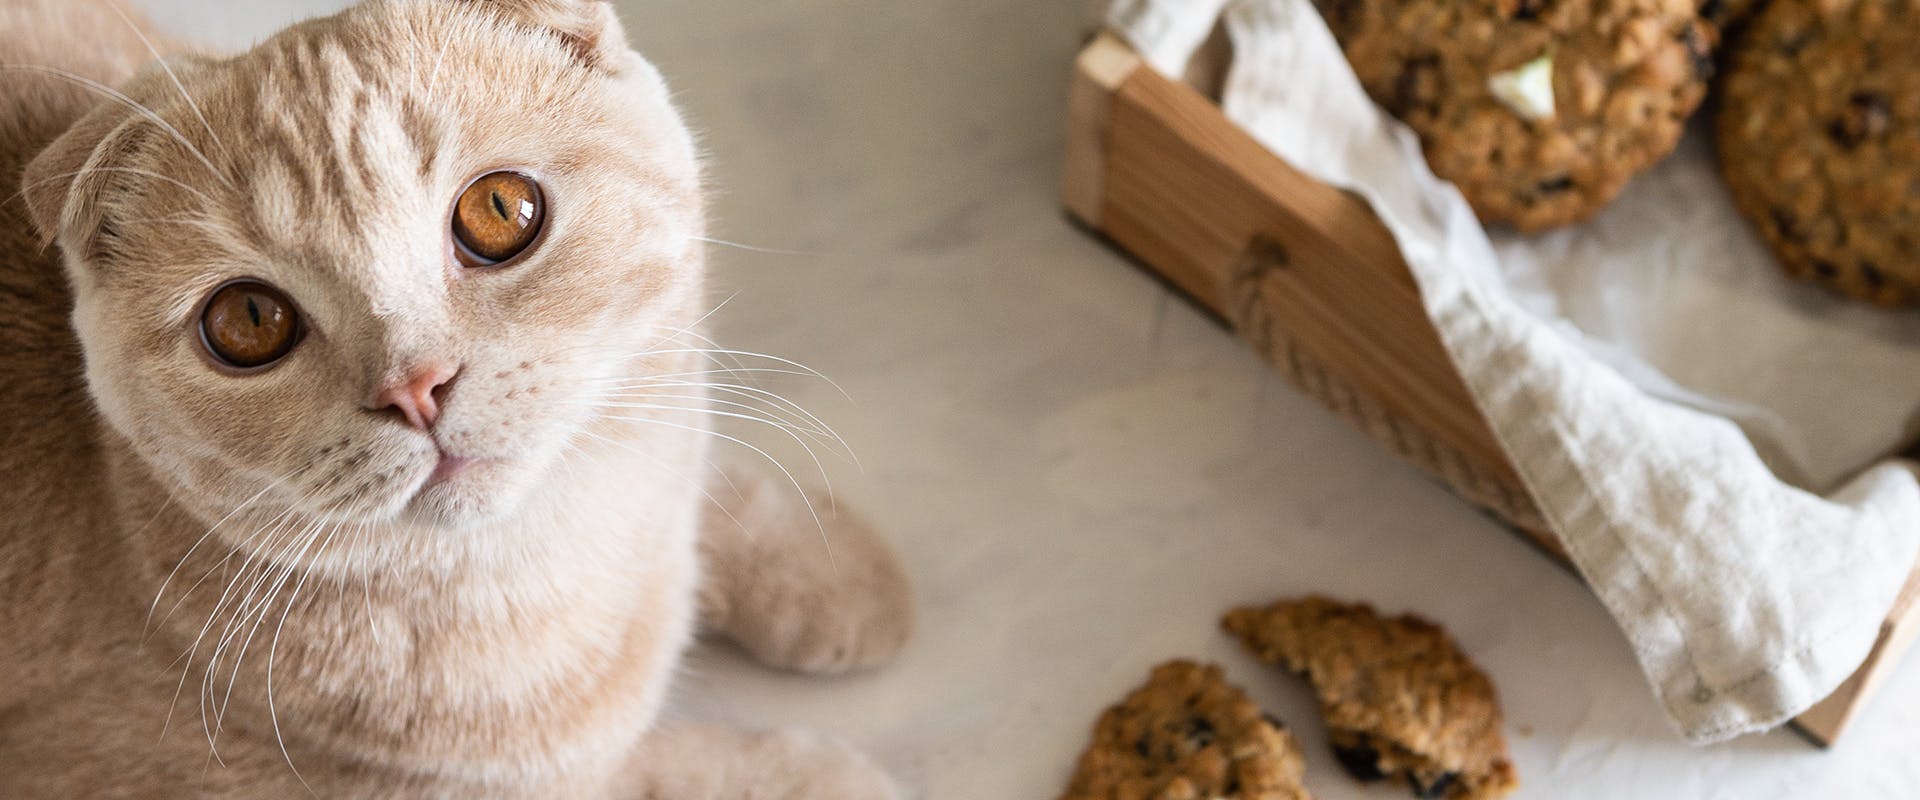 A cat looking upwards while sitting next to a basket of peanut butter cookies